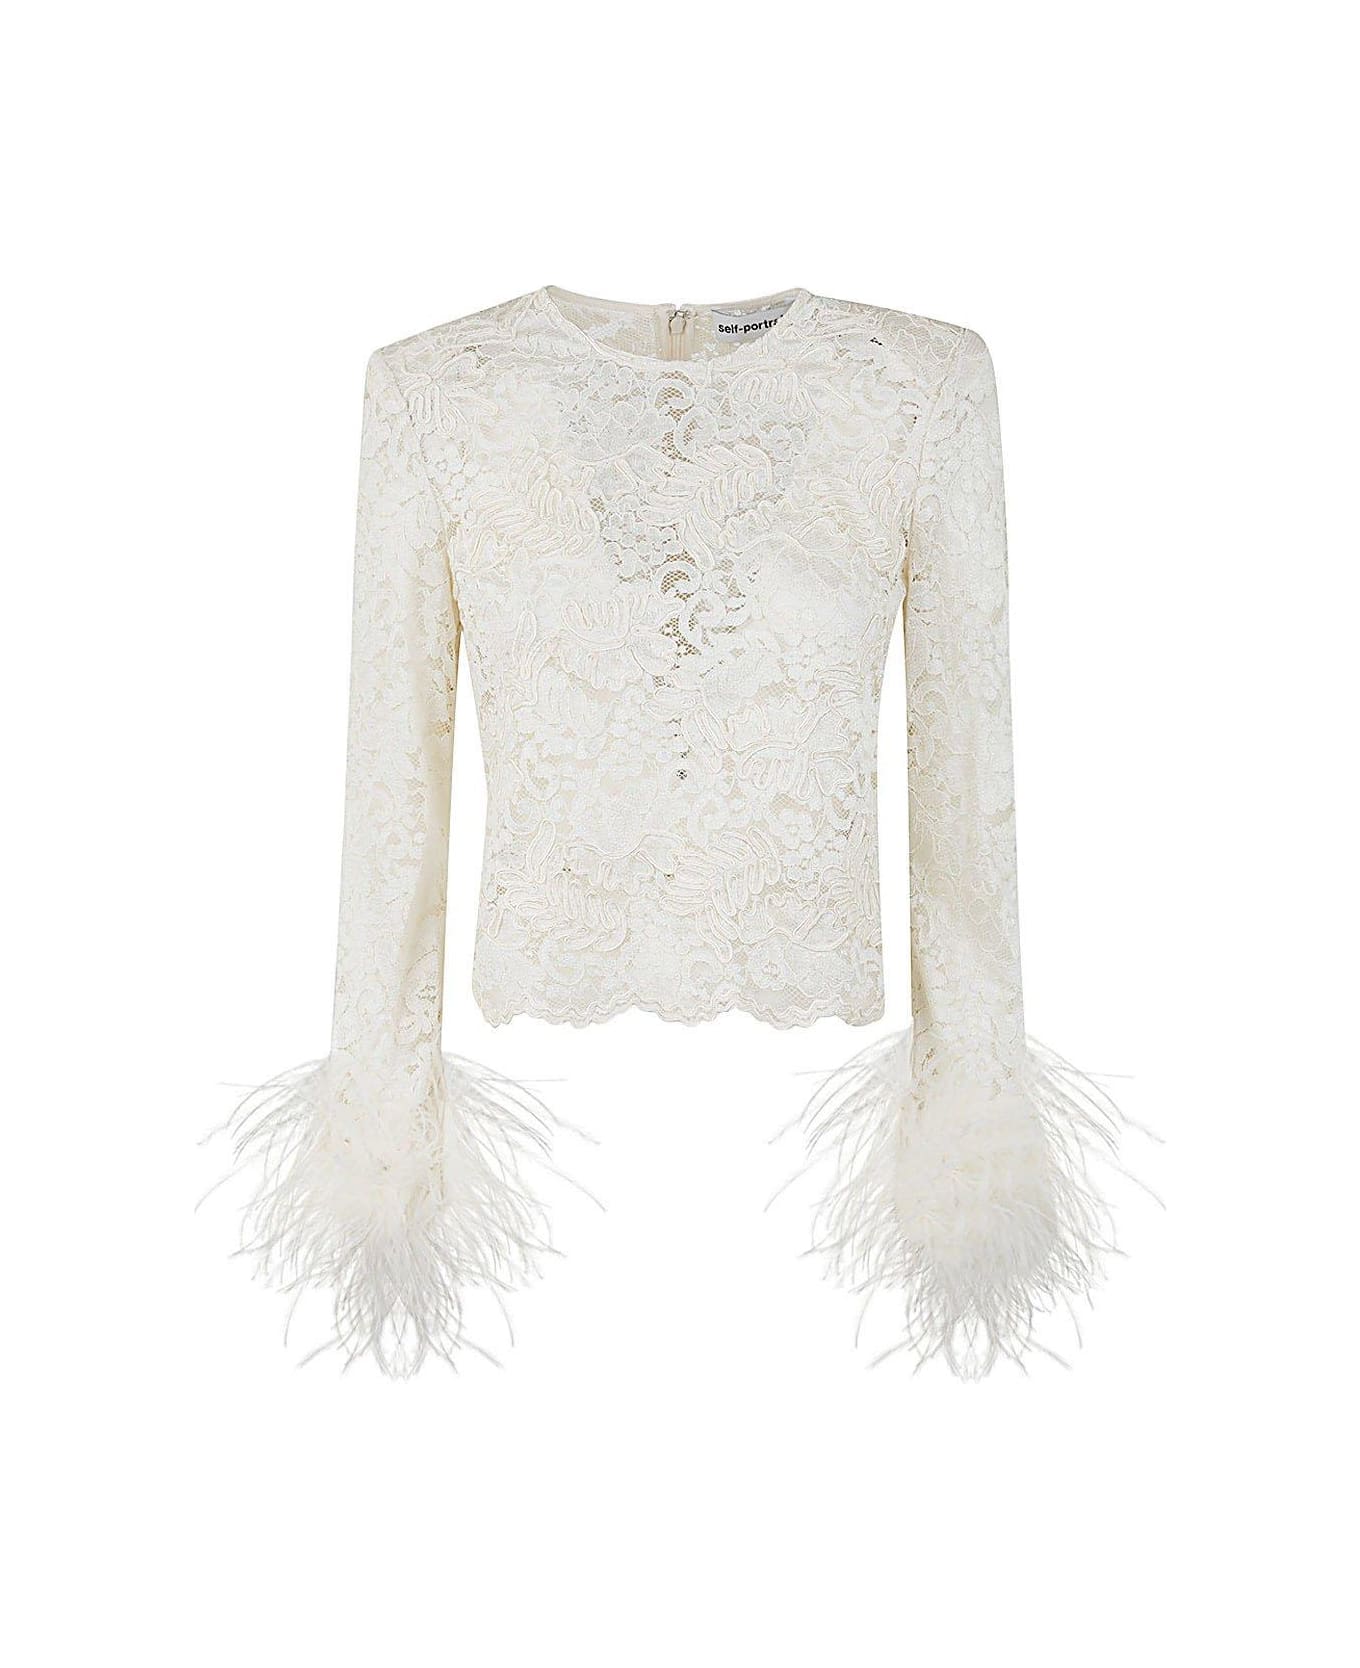 self-portrait Lace-detailed Long-sleeved Top - Cream トップス